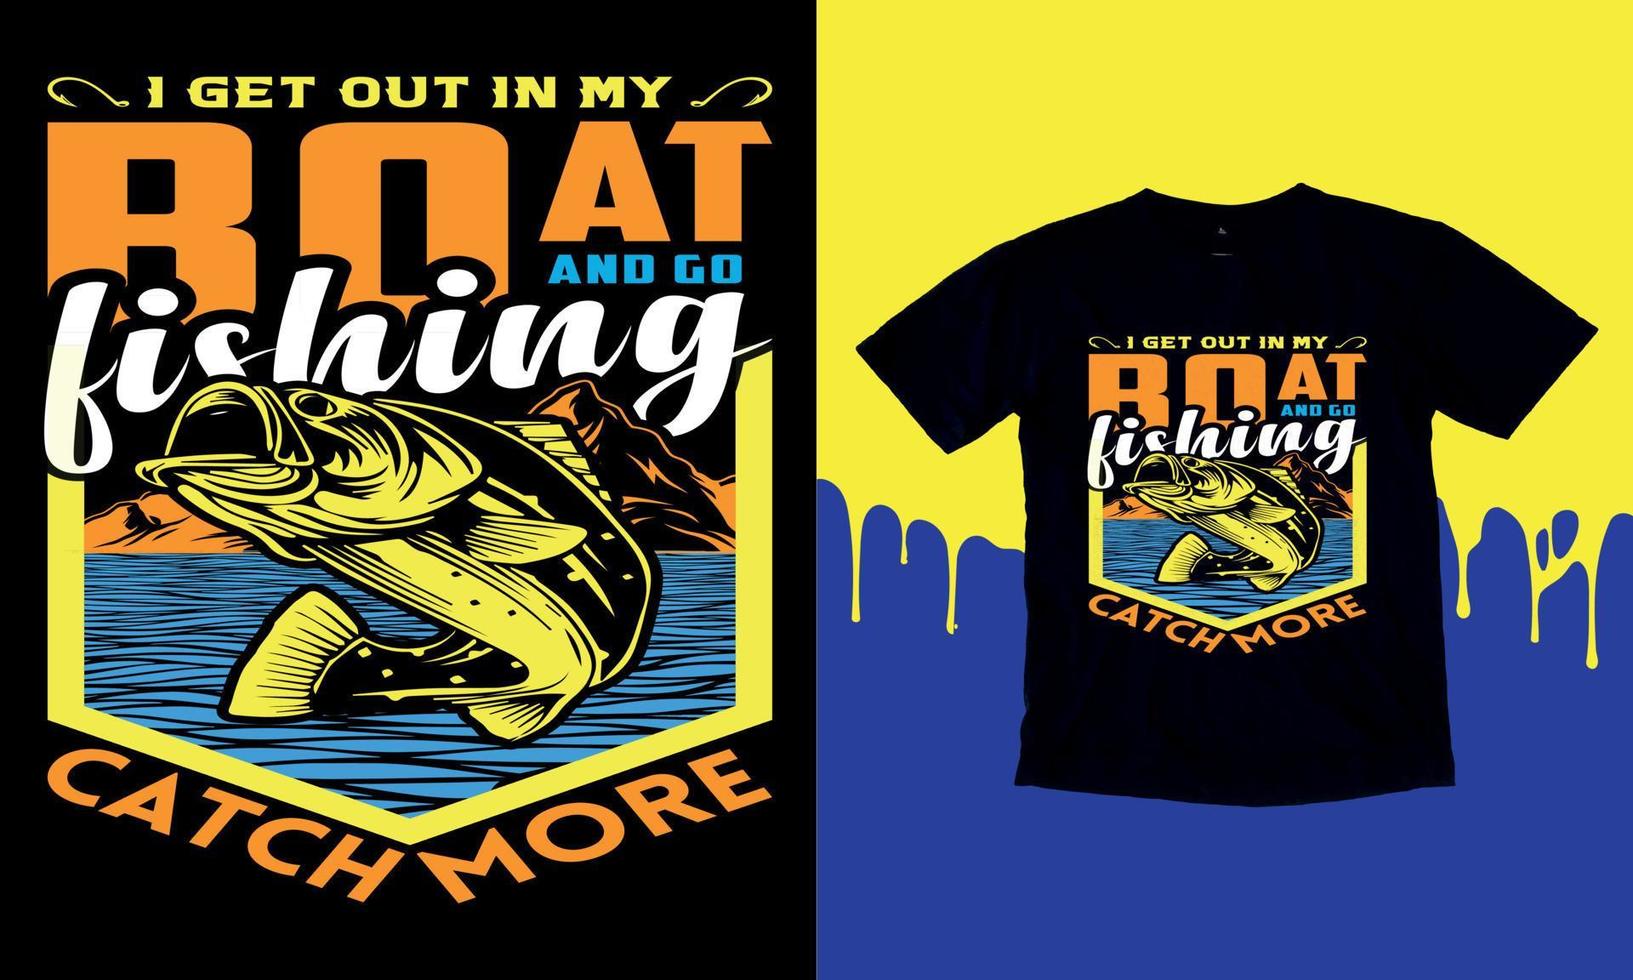 https://static.vecteezy.com/system/resources/previews/016/625/572/non_2x/i-get-out-in-my-boat-and-go-fishing-catch-more-t-shirt-gift-men-s-funny-fishing-t-shirts-design-graphic-typographic-poster-or-t-shirt-vector.jpg